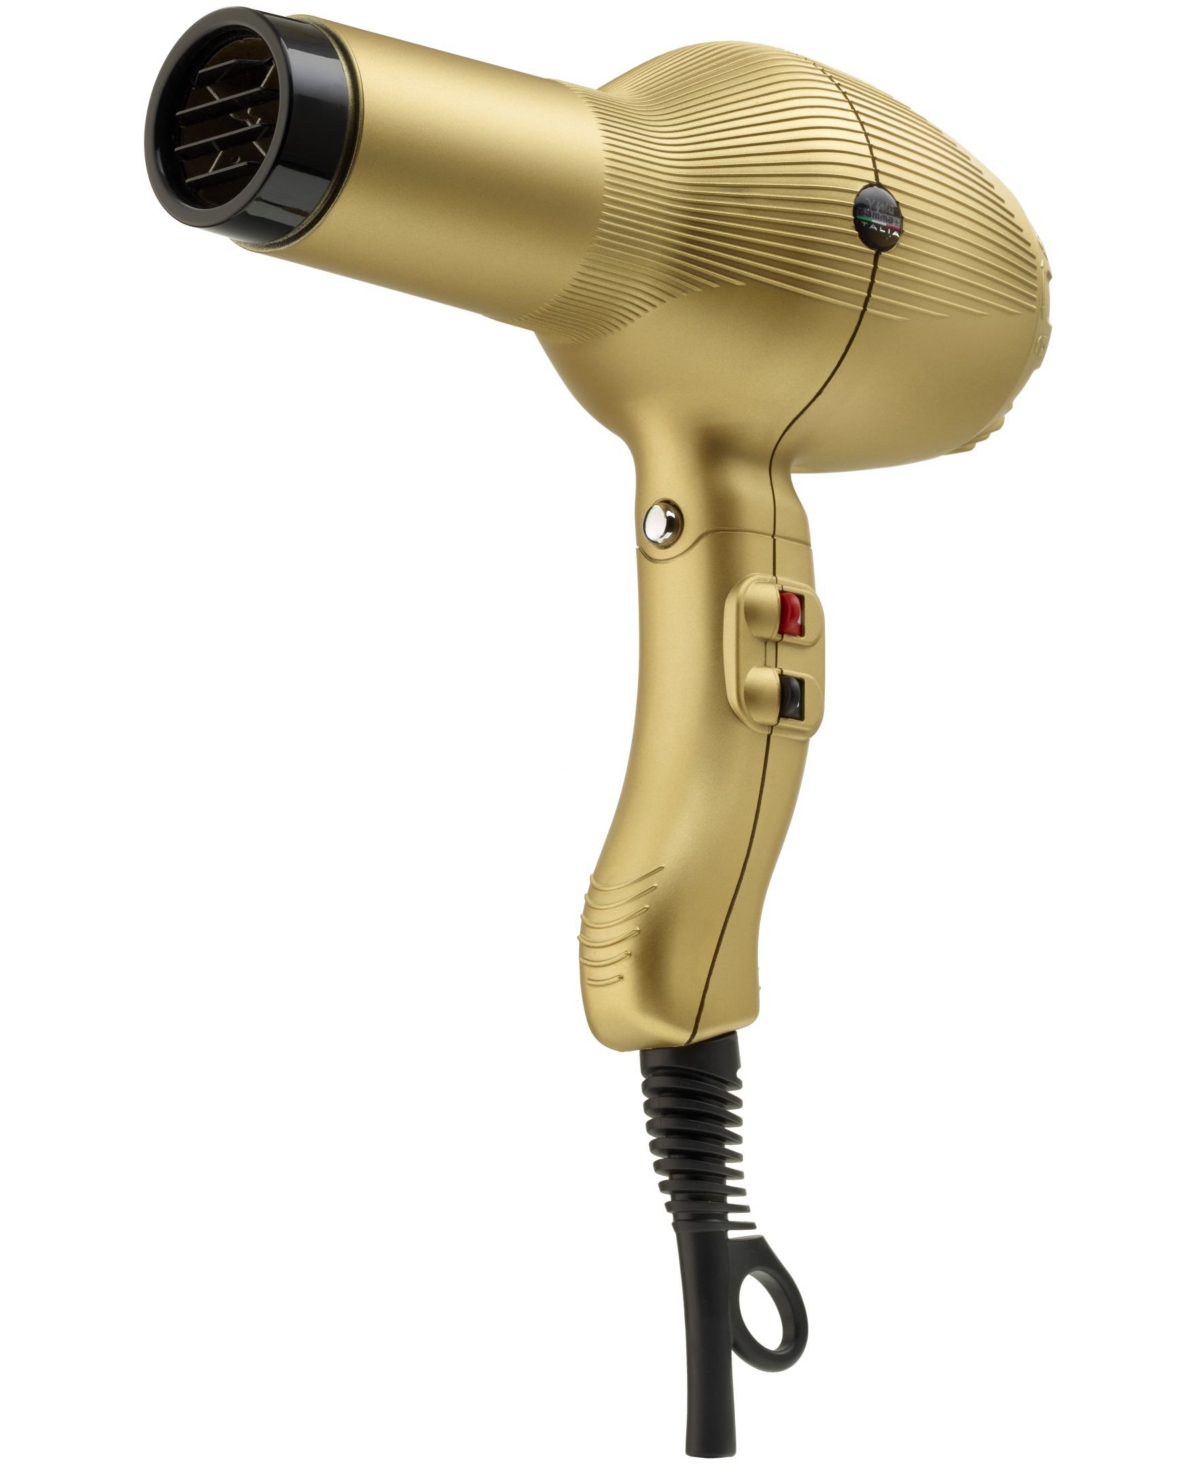 Absolute Power Tourmaline Ionic Professional Hair Dryer - Silver-Tone